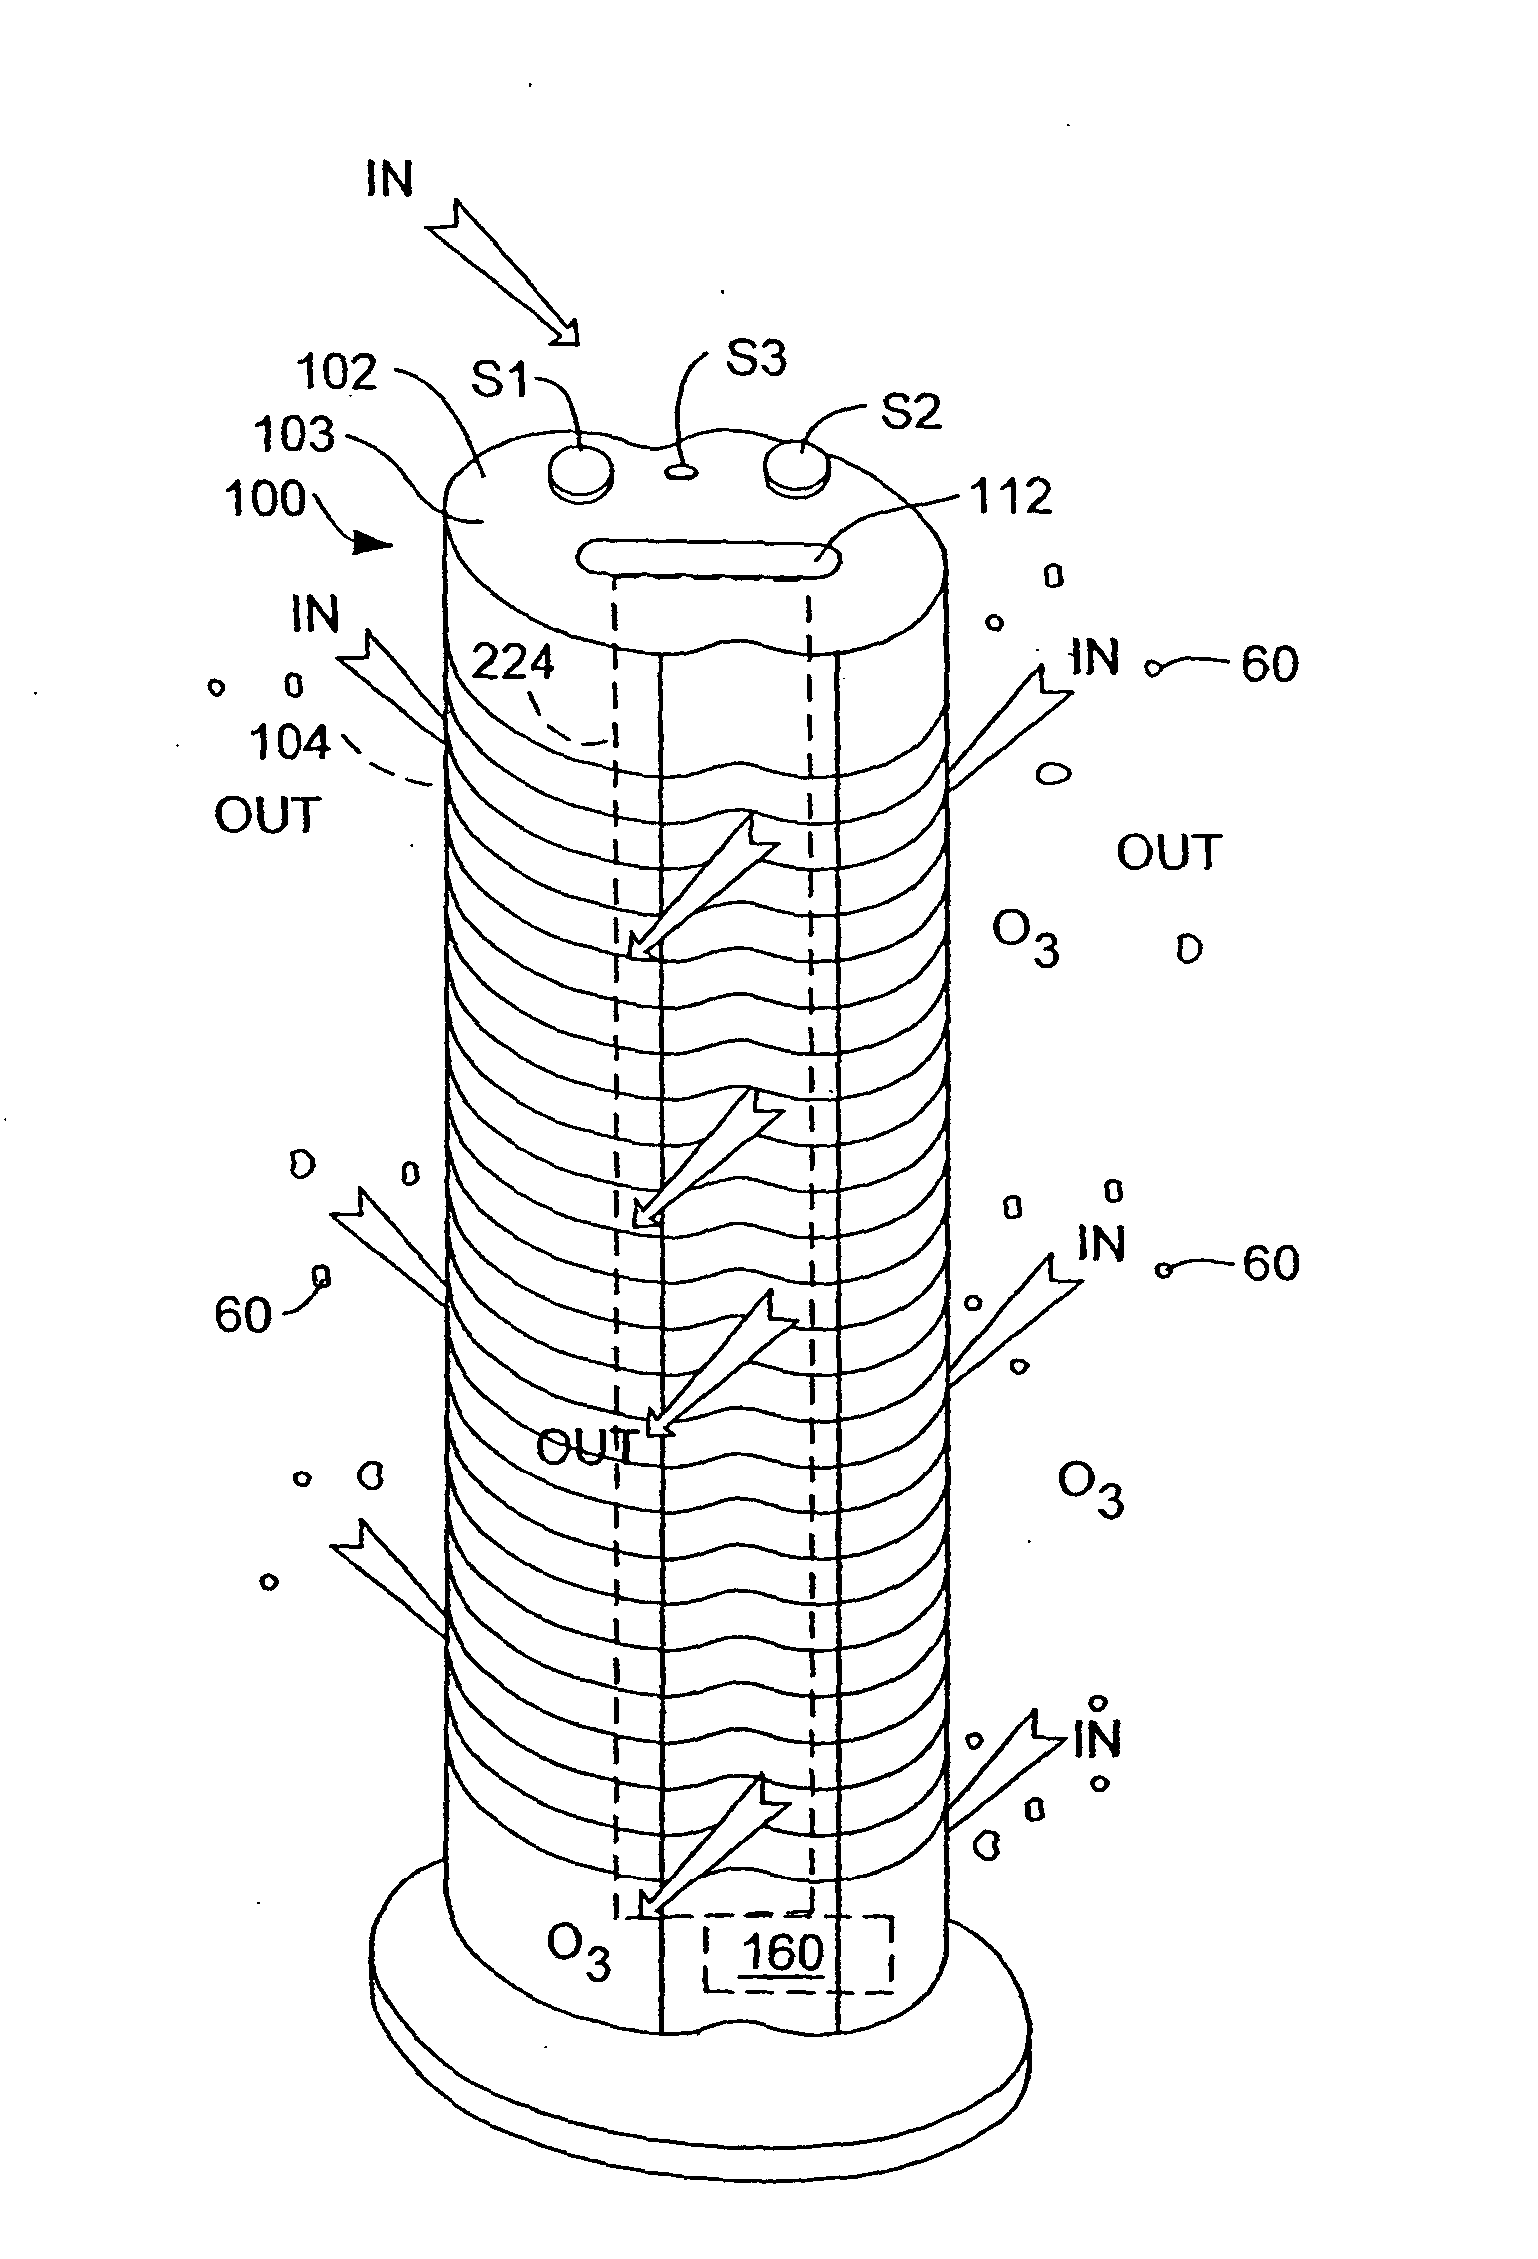 Electro-kinetic air transporter and conditioner devices with features that compensate for variations in line voltage